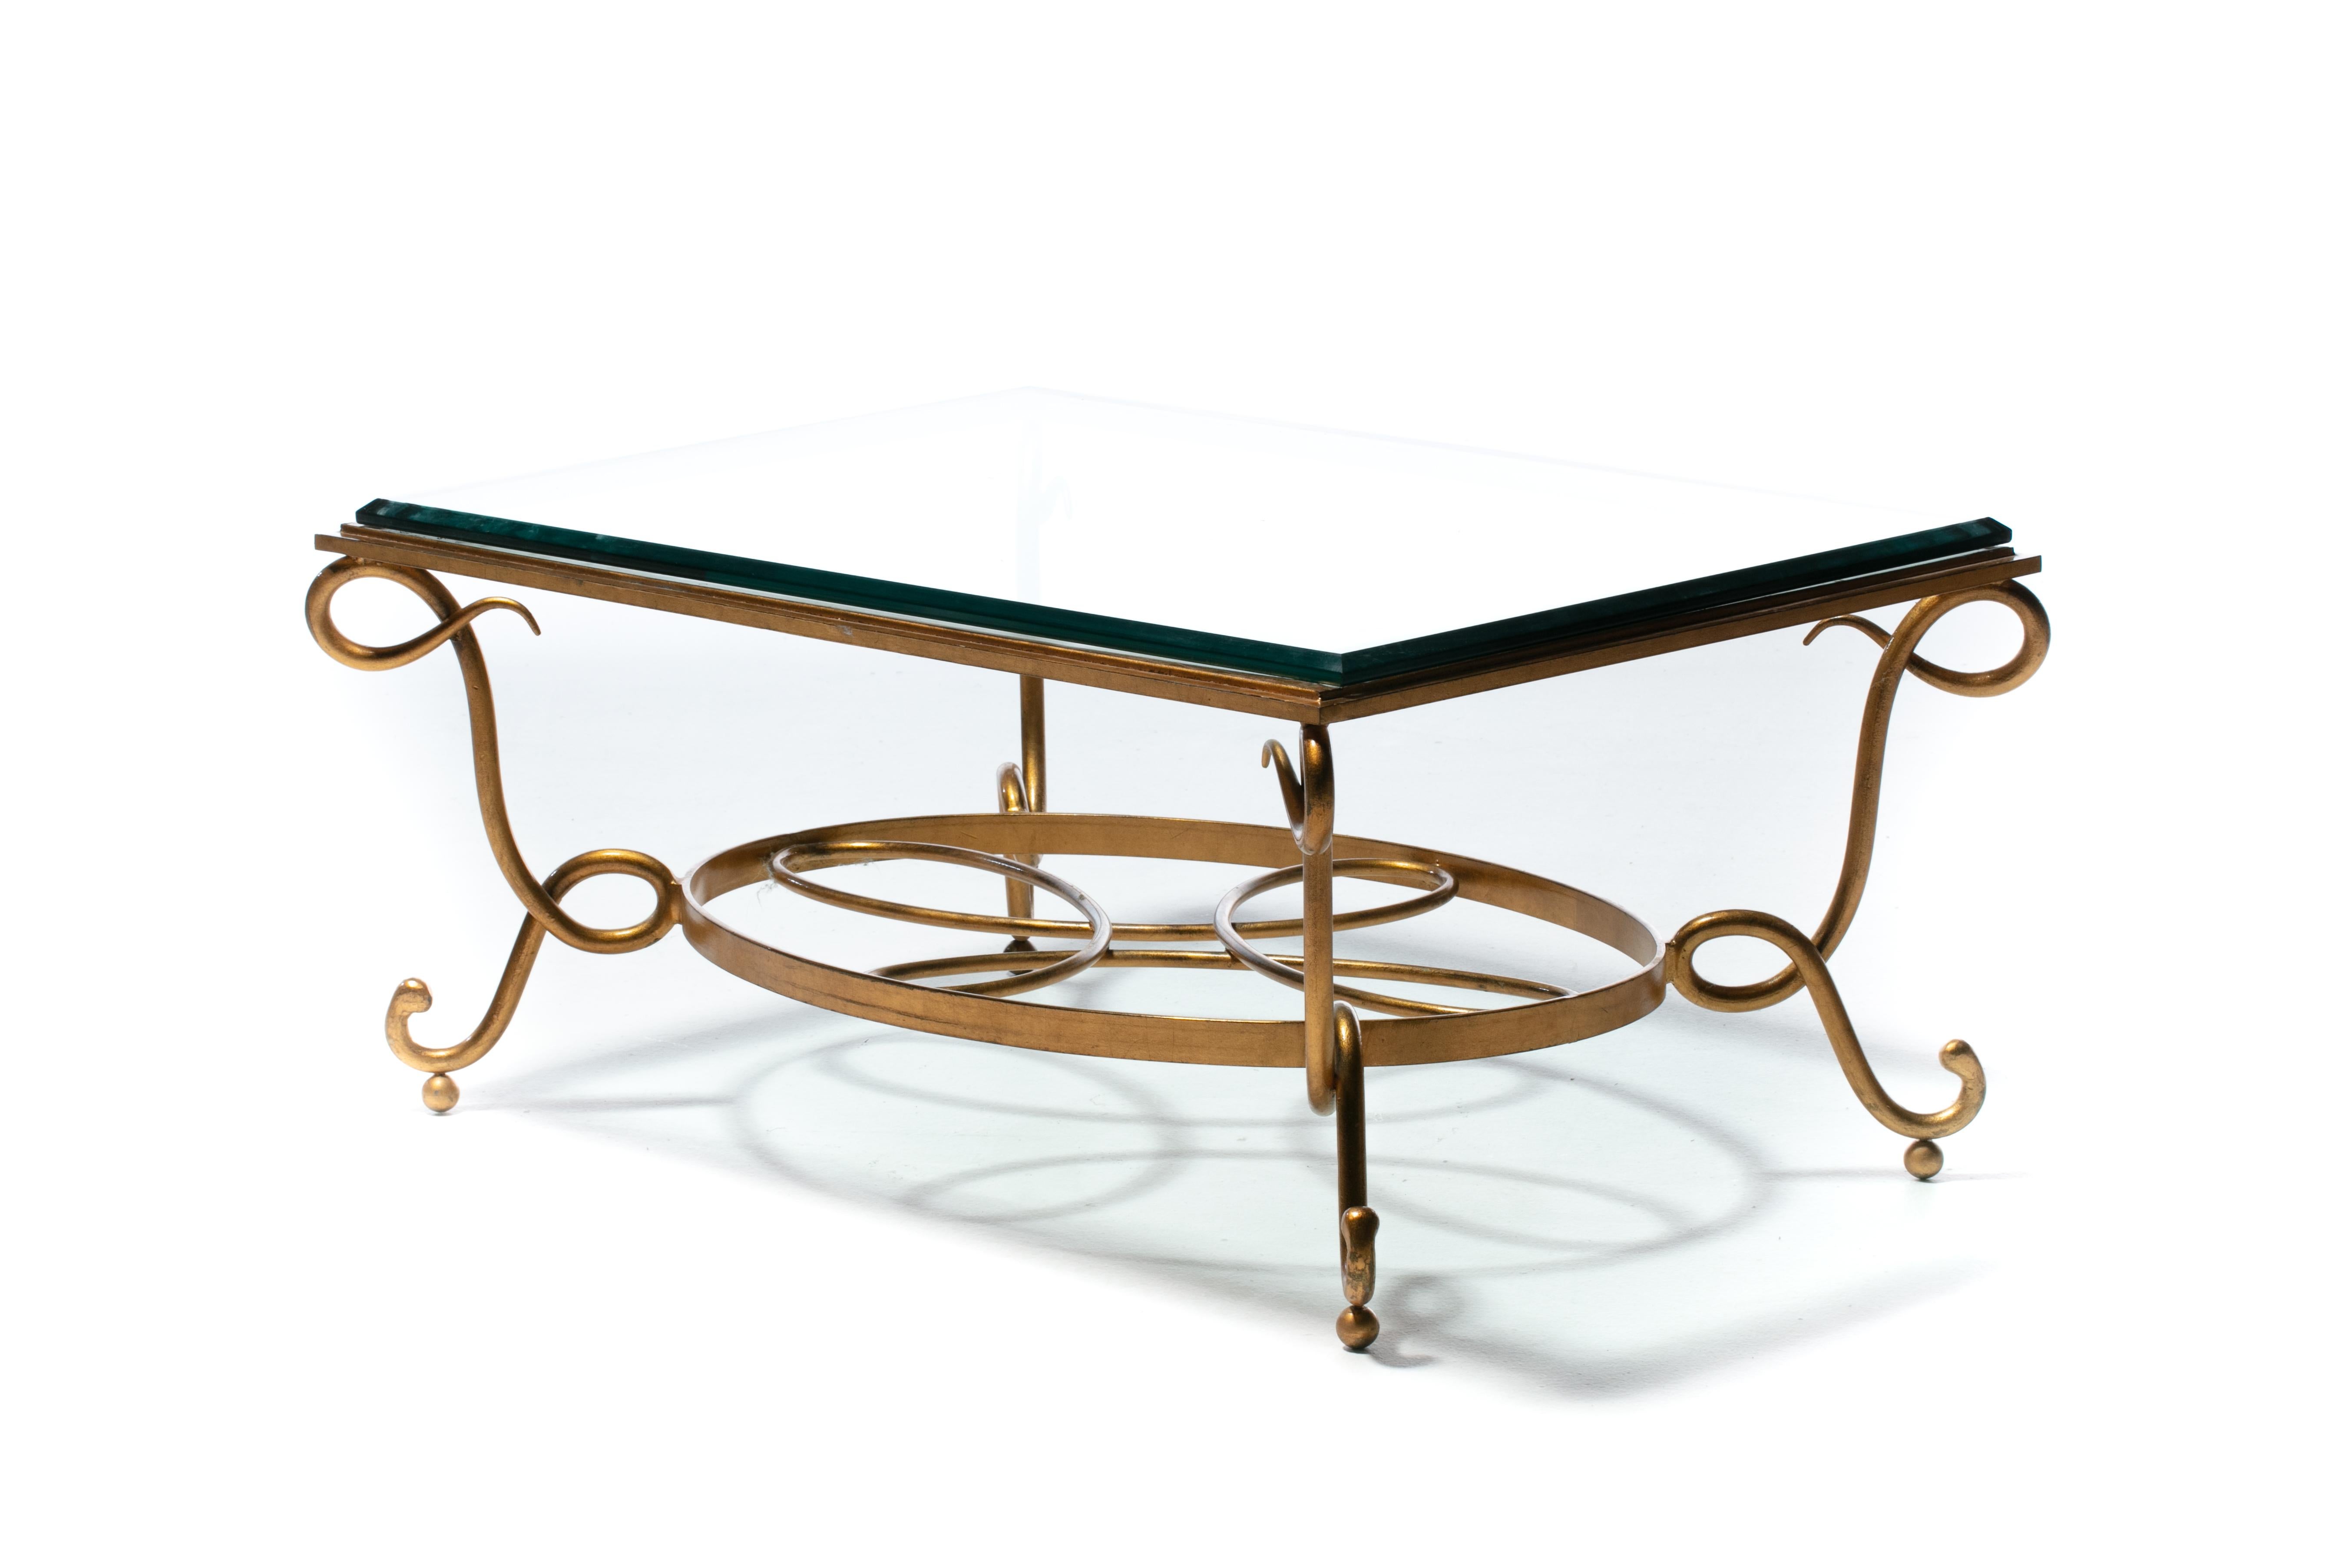 French 1940s René Prou Style Gilt Iron Coffee Table For Sale 7